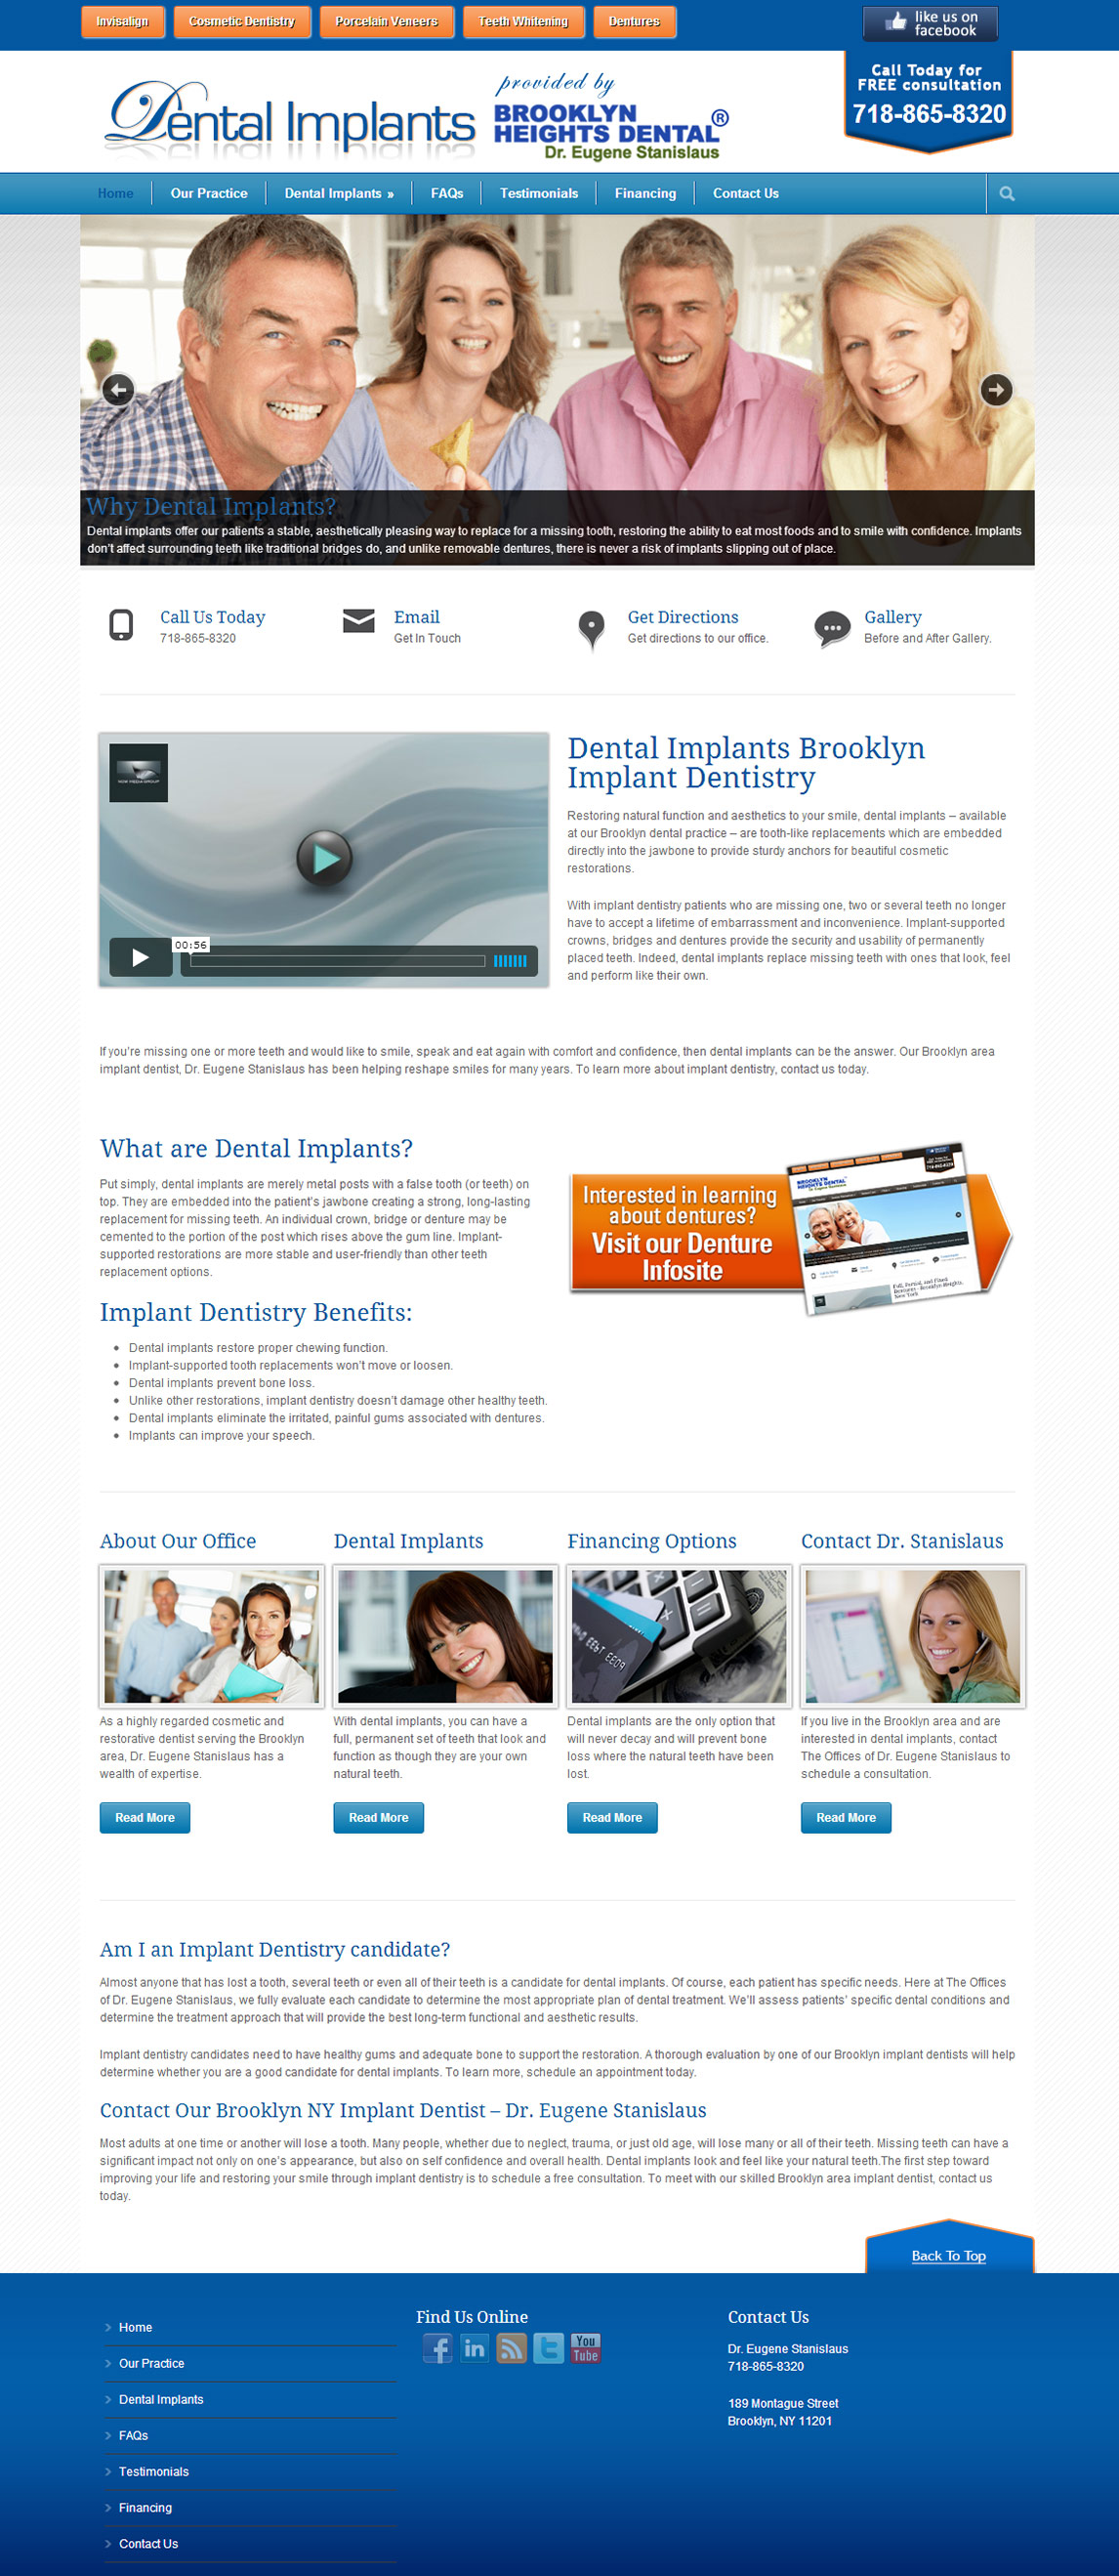 Dental Implants InfoSite by Now Media Group